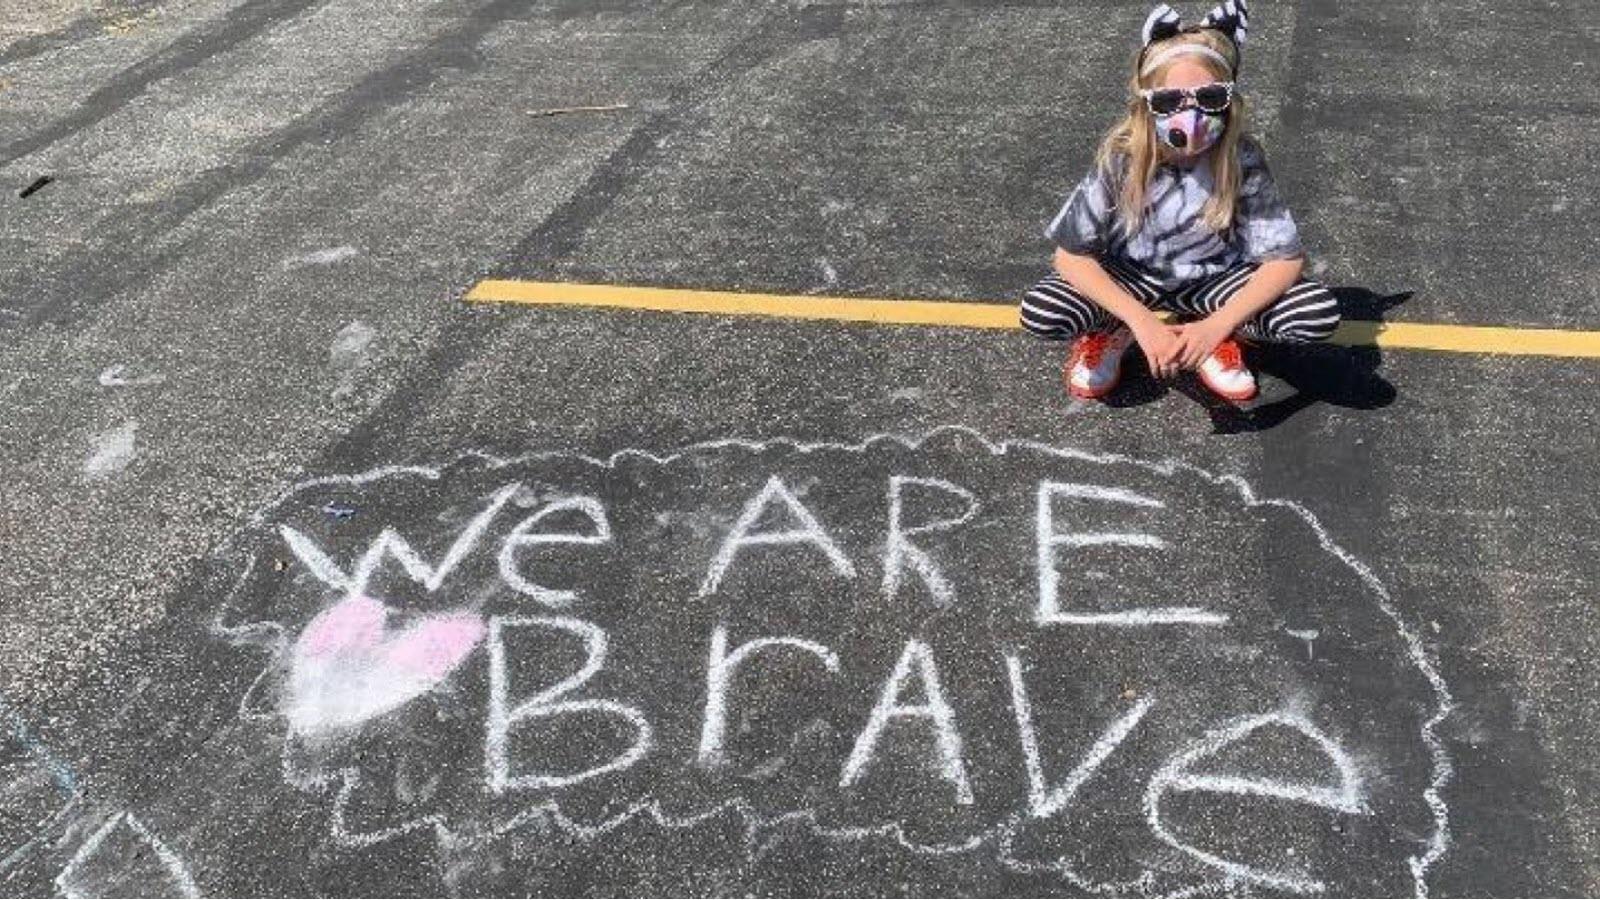 Little girl dressed in zebra attire with a chalk sign that says We Are Brave